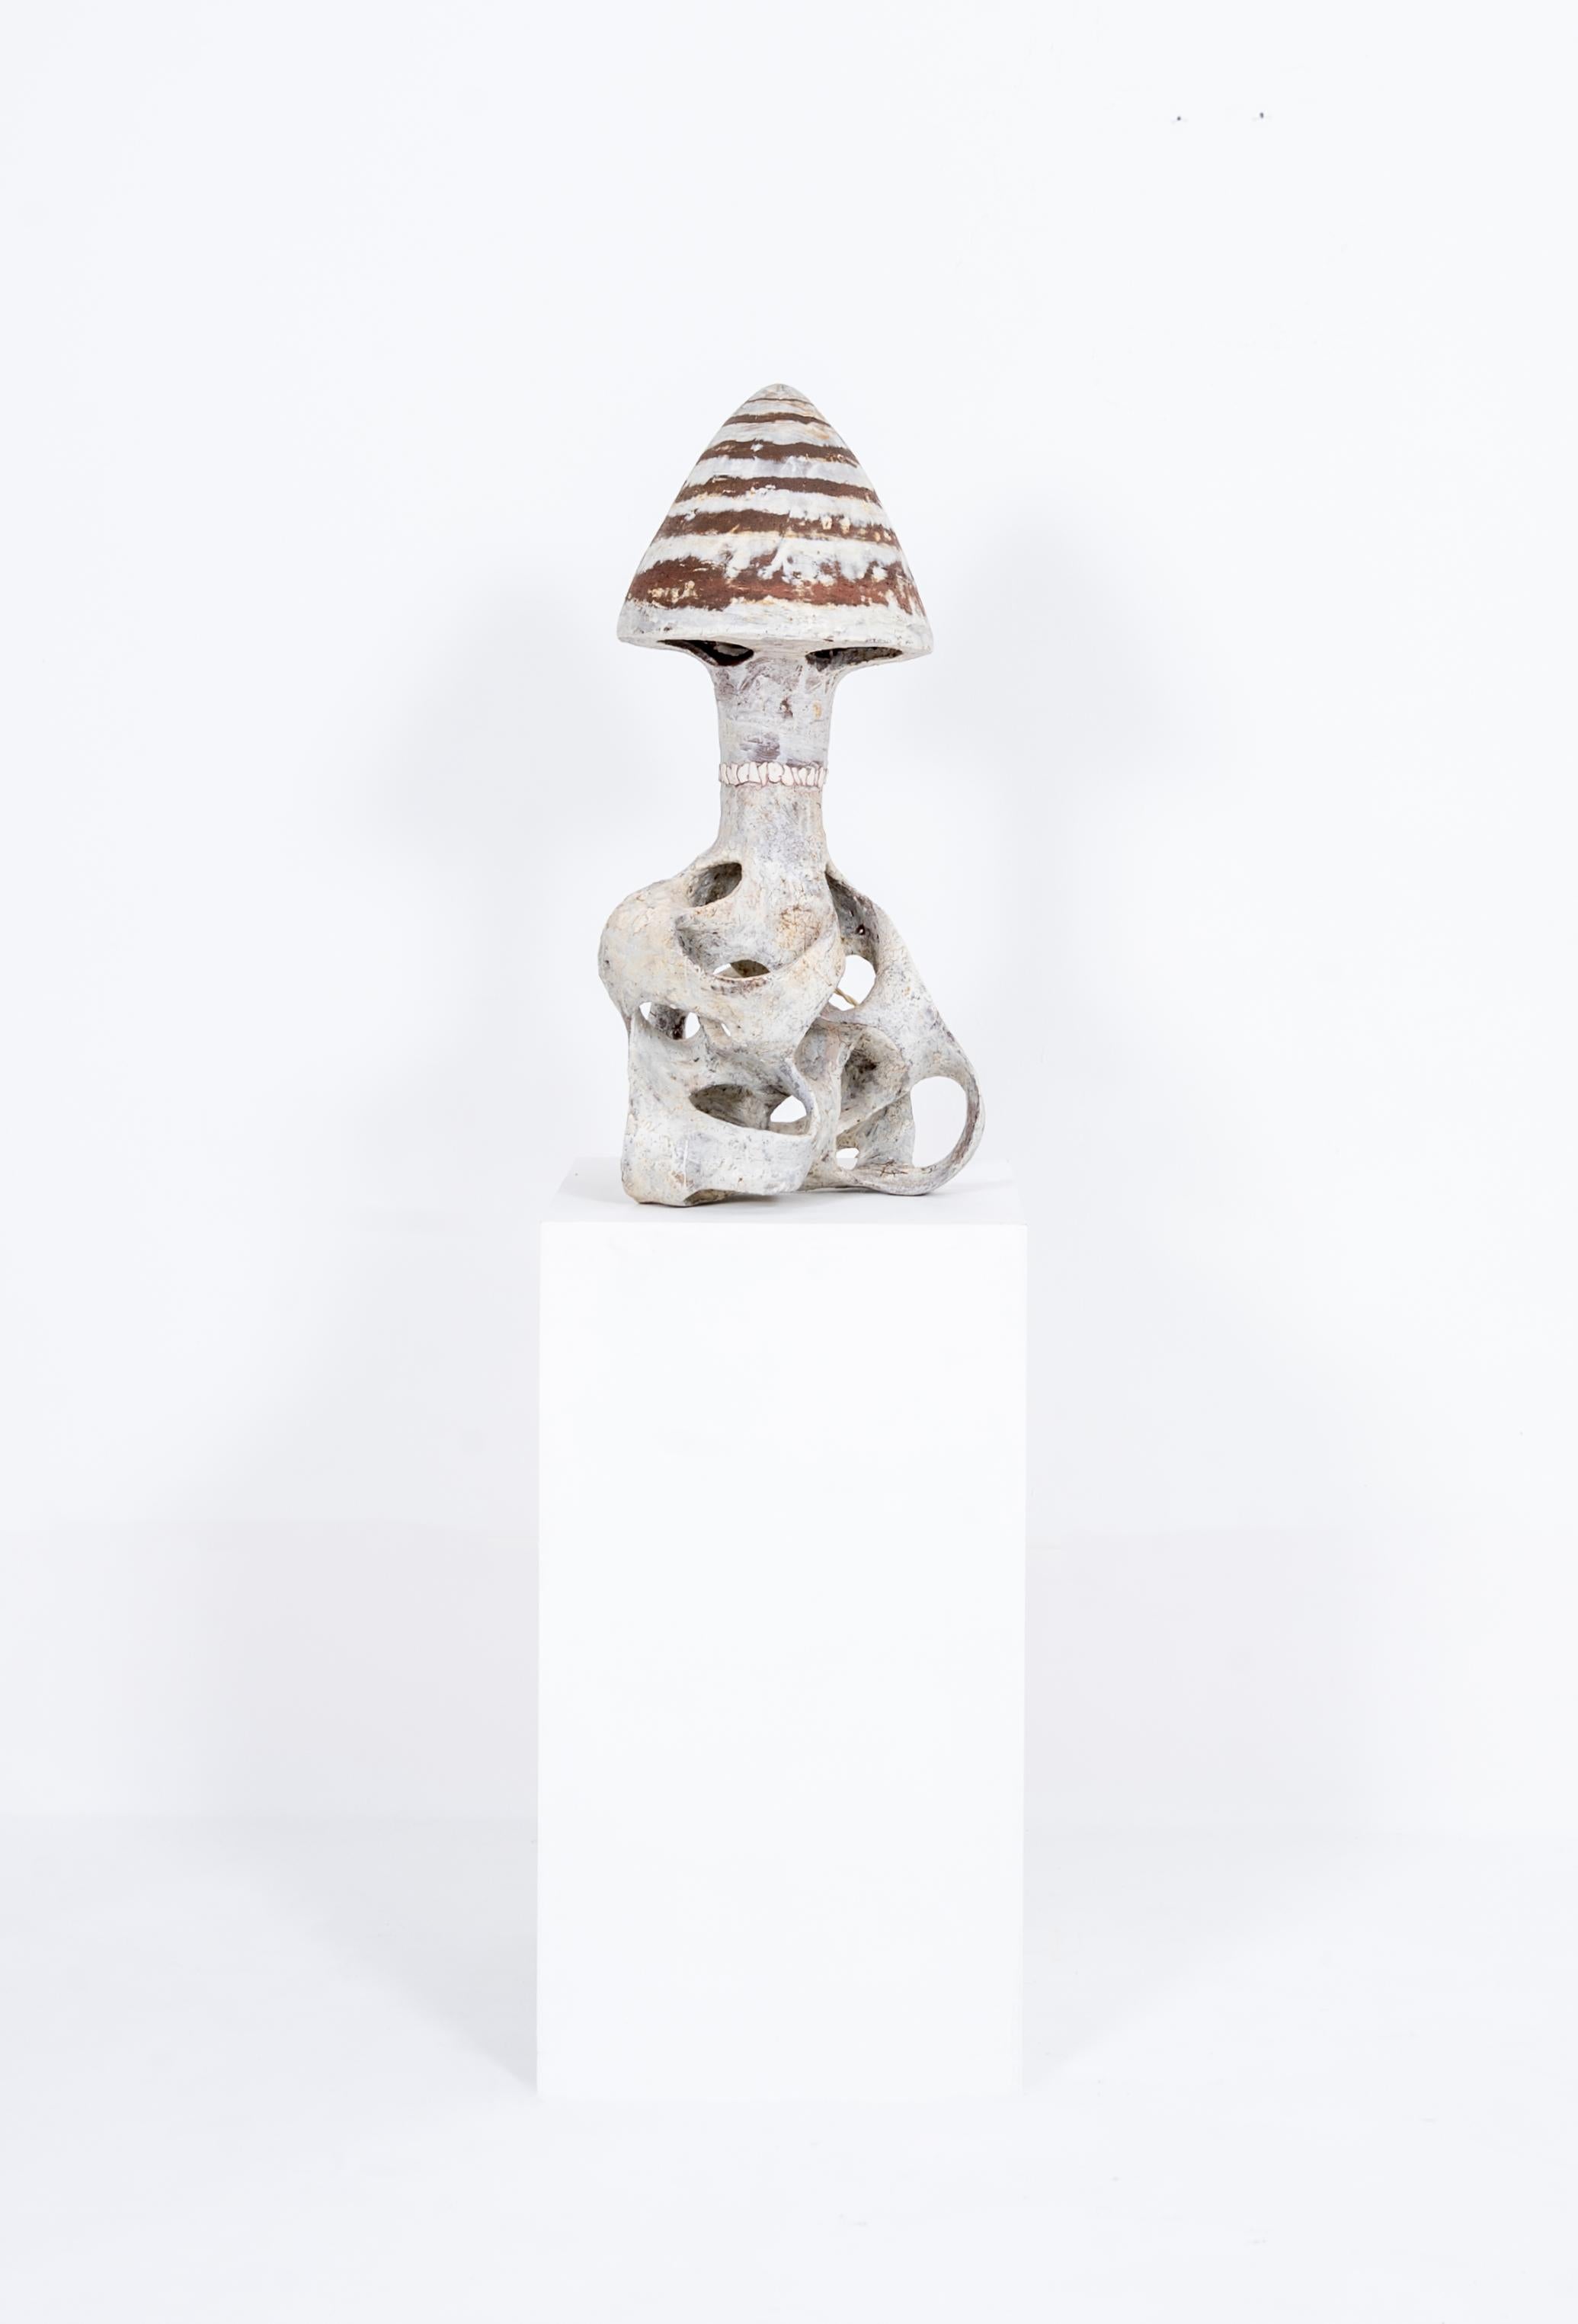 Mushroom Lamp by Agnès Debizet 
Material: Stoneware, porcelain slip
Dimensions: H 60 x 35 cm
Year: 2023
Type: Unique piece 

Turning toward the Decorative Arts in the early 2010s, Agnès Debizet invites viewers into a world of captivating